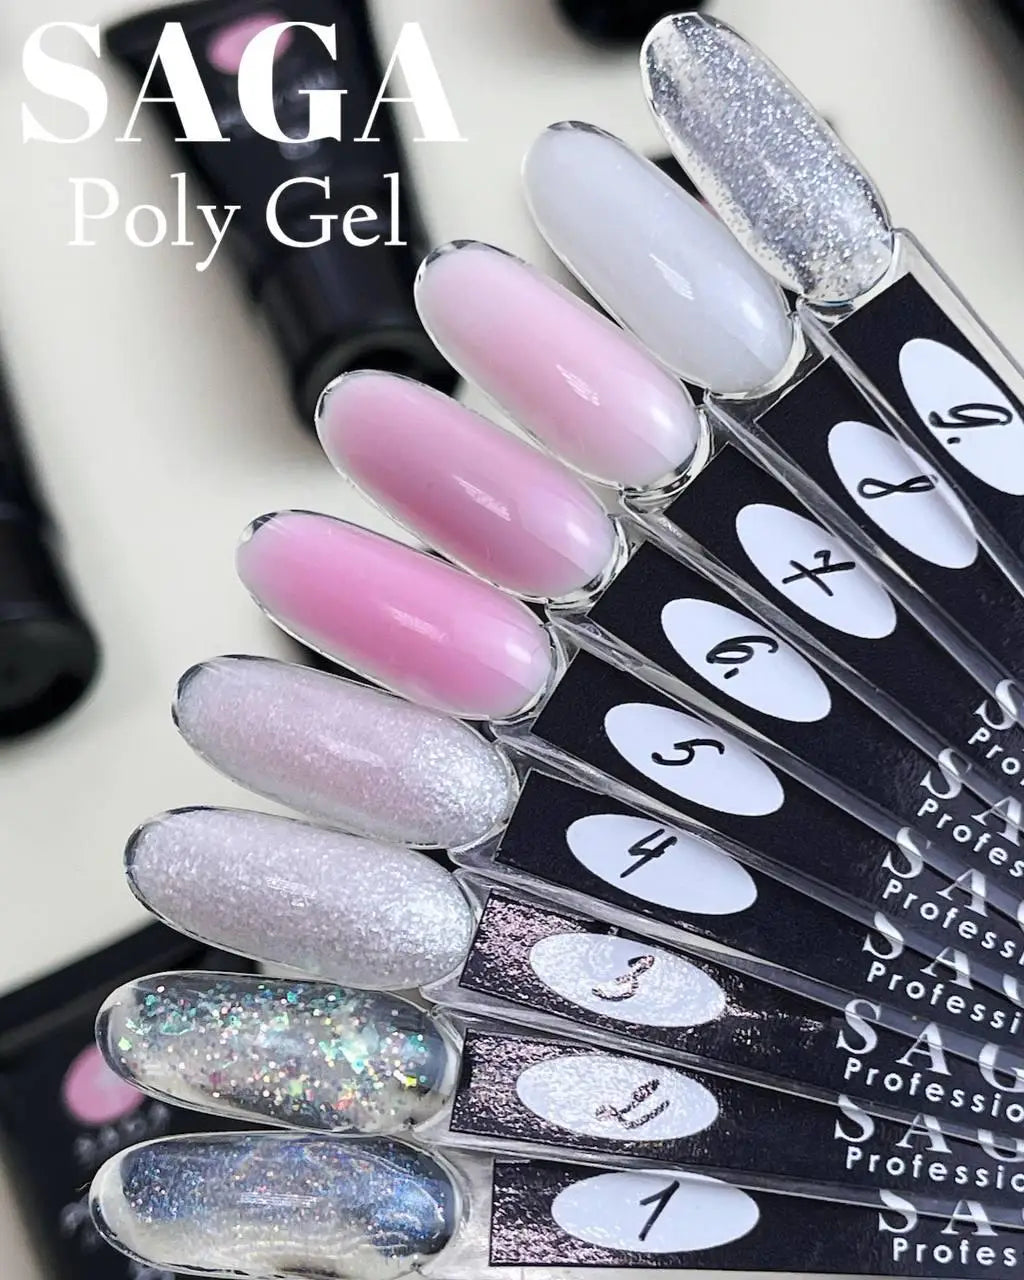 Poly-gel Saga Exclusive No. 2, 30 ml (transparent with large shimmer)